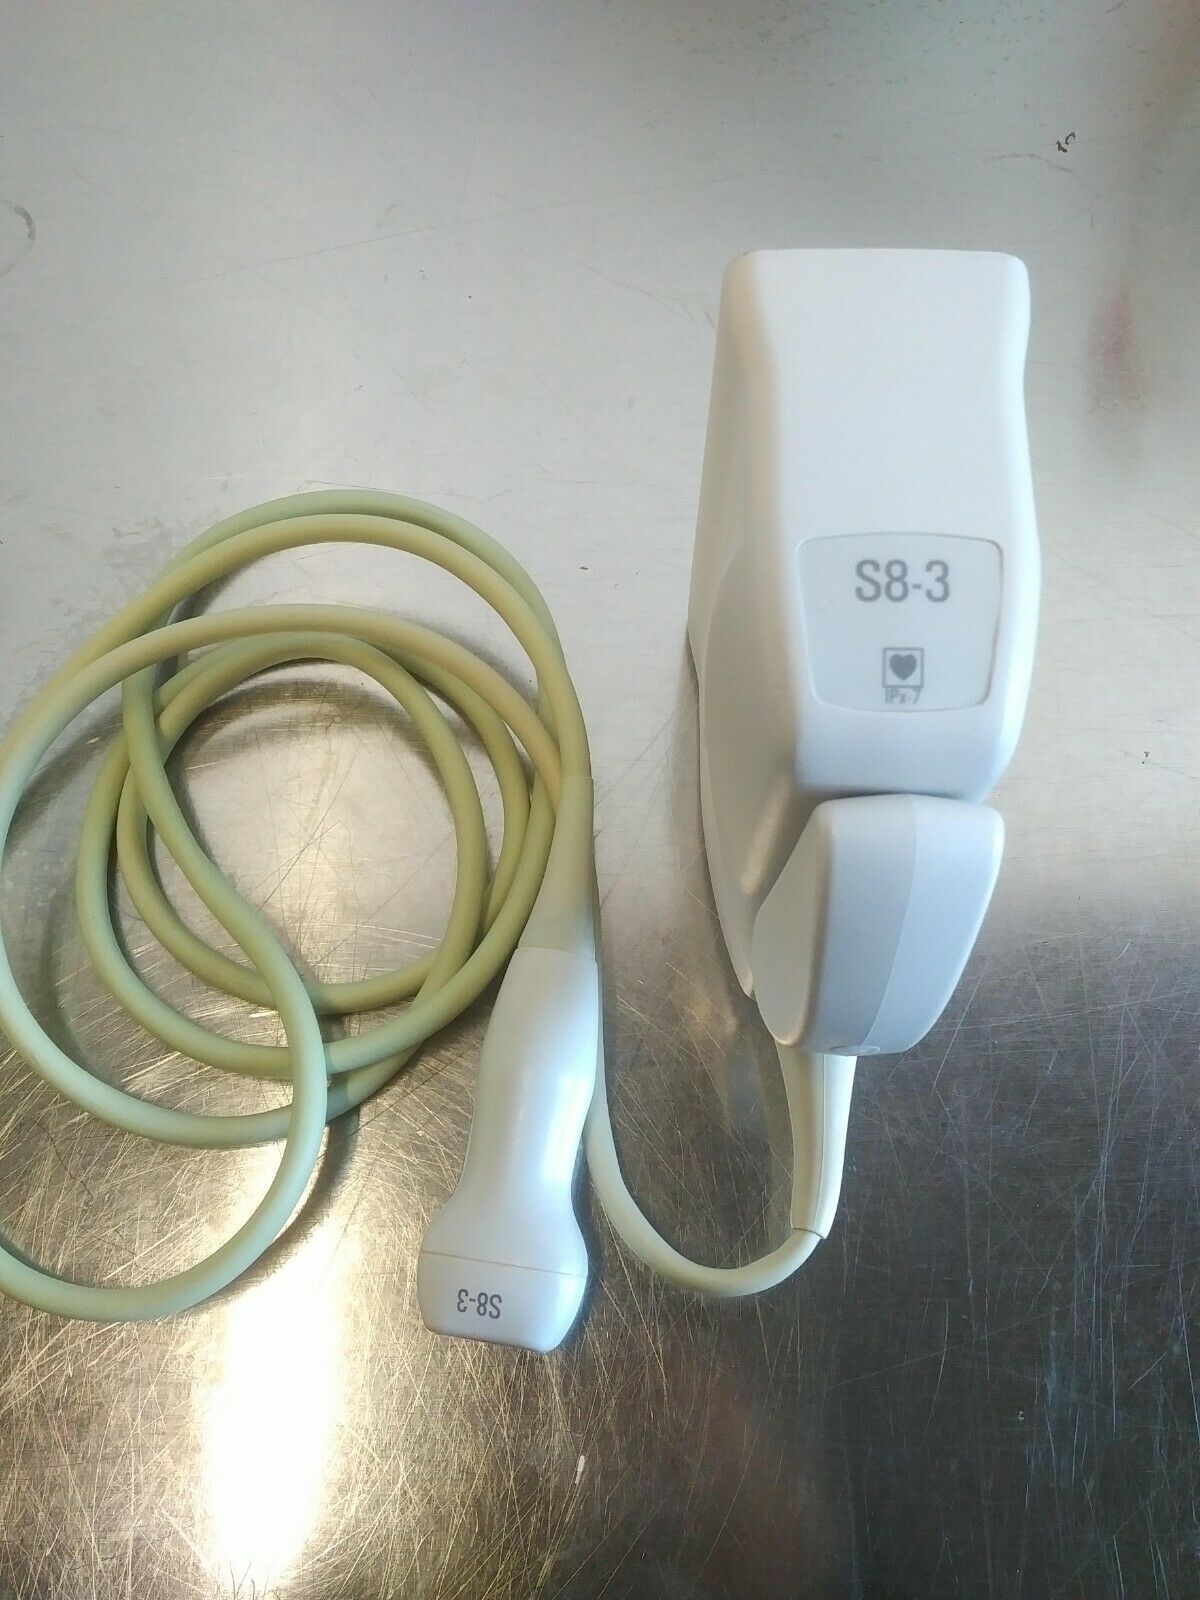 Philips S8-3 Ultrasound Probe      #2 DIAGNOSTIC ULTRASOUND MACHINES FOR SALE